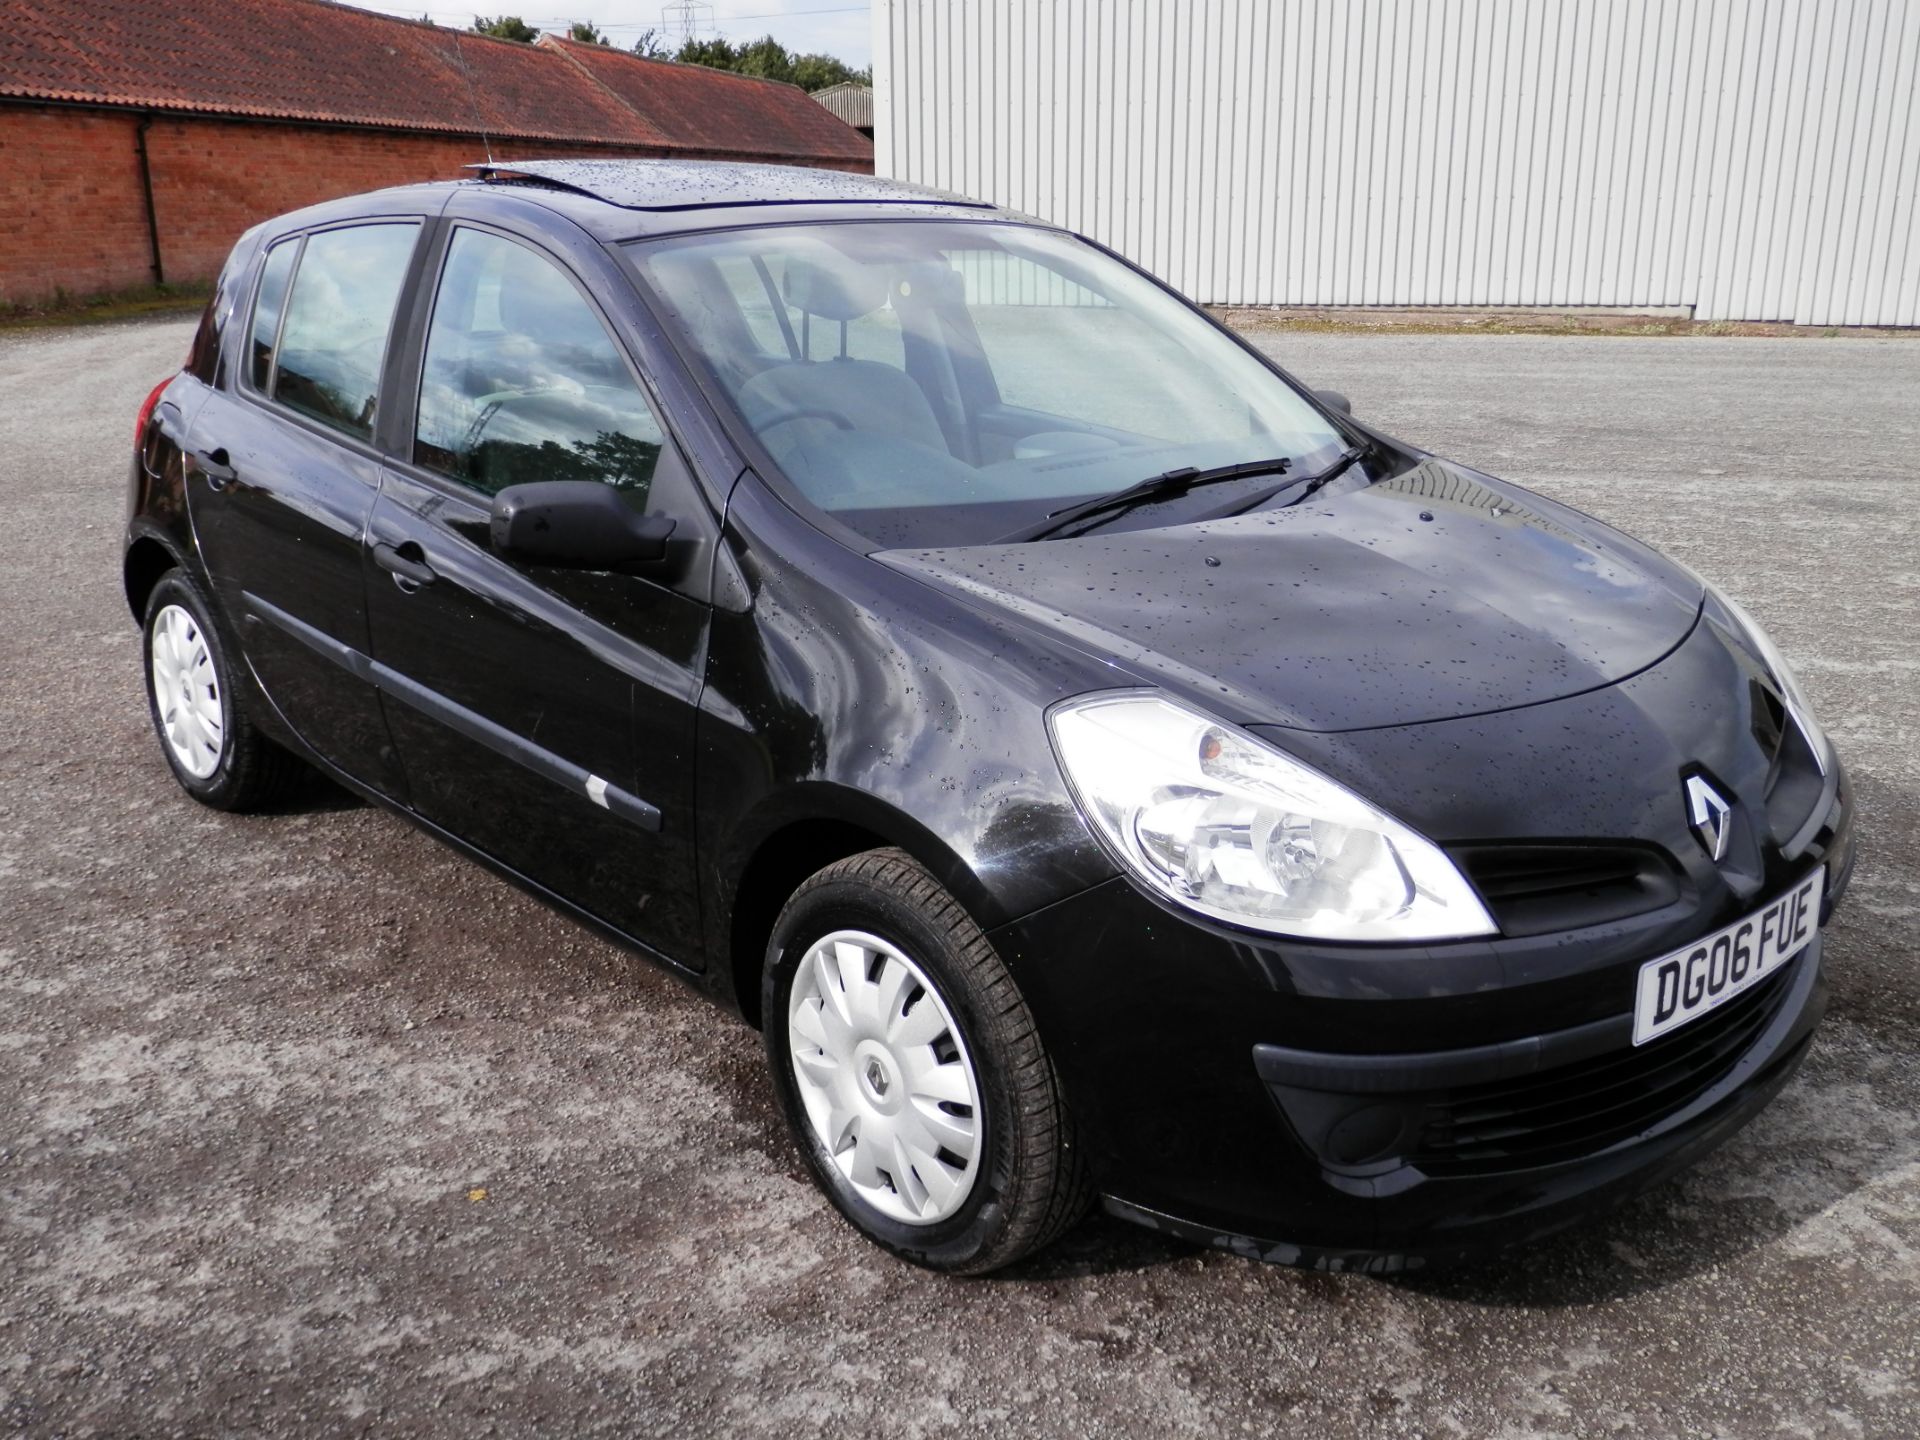 06/2006 RENAULT CLIO (FACELIFT MODEL) 1.4 EXPRESSION 16 VALVE, AIR CON, ONLY 47K MILES WARRANTED. - Image 6 of 26